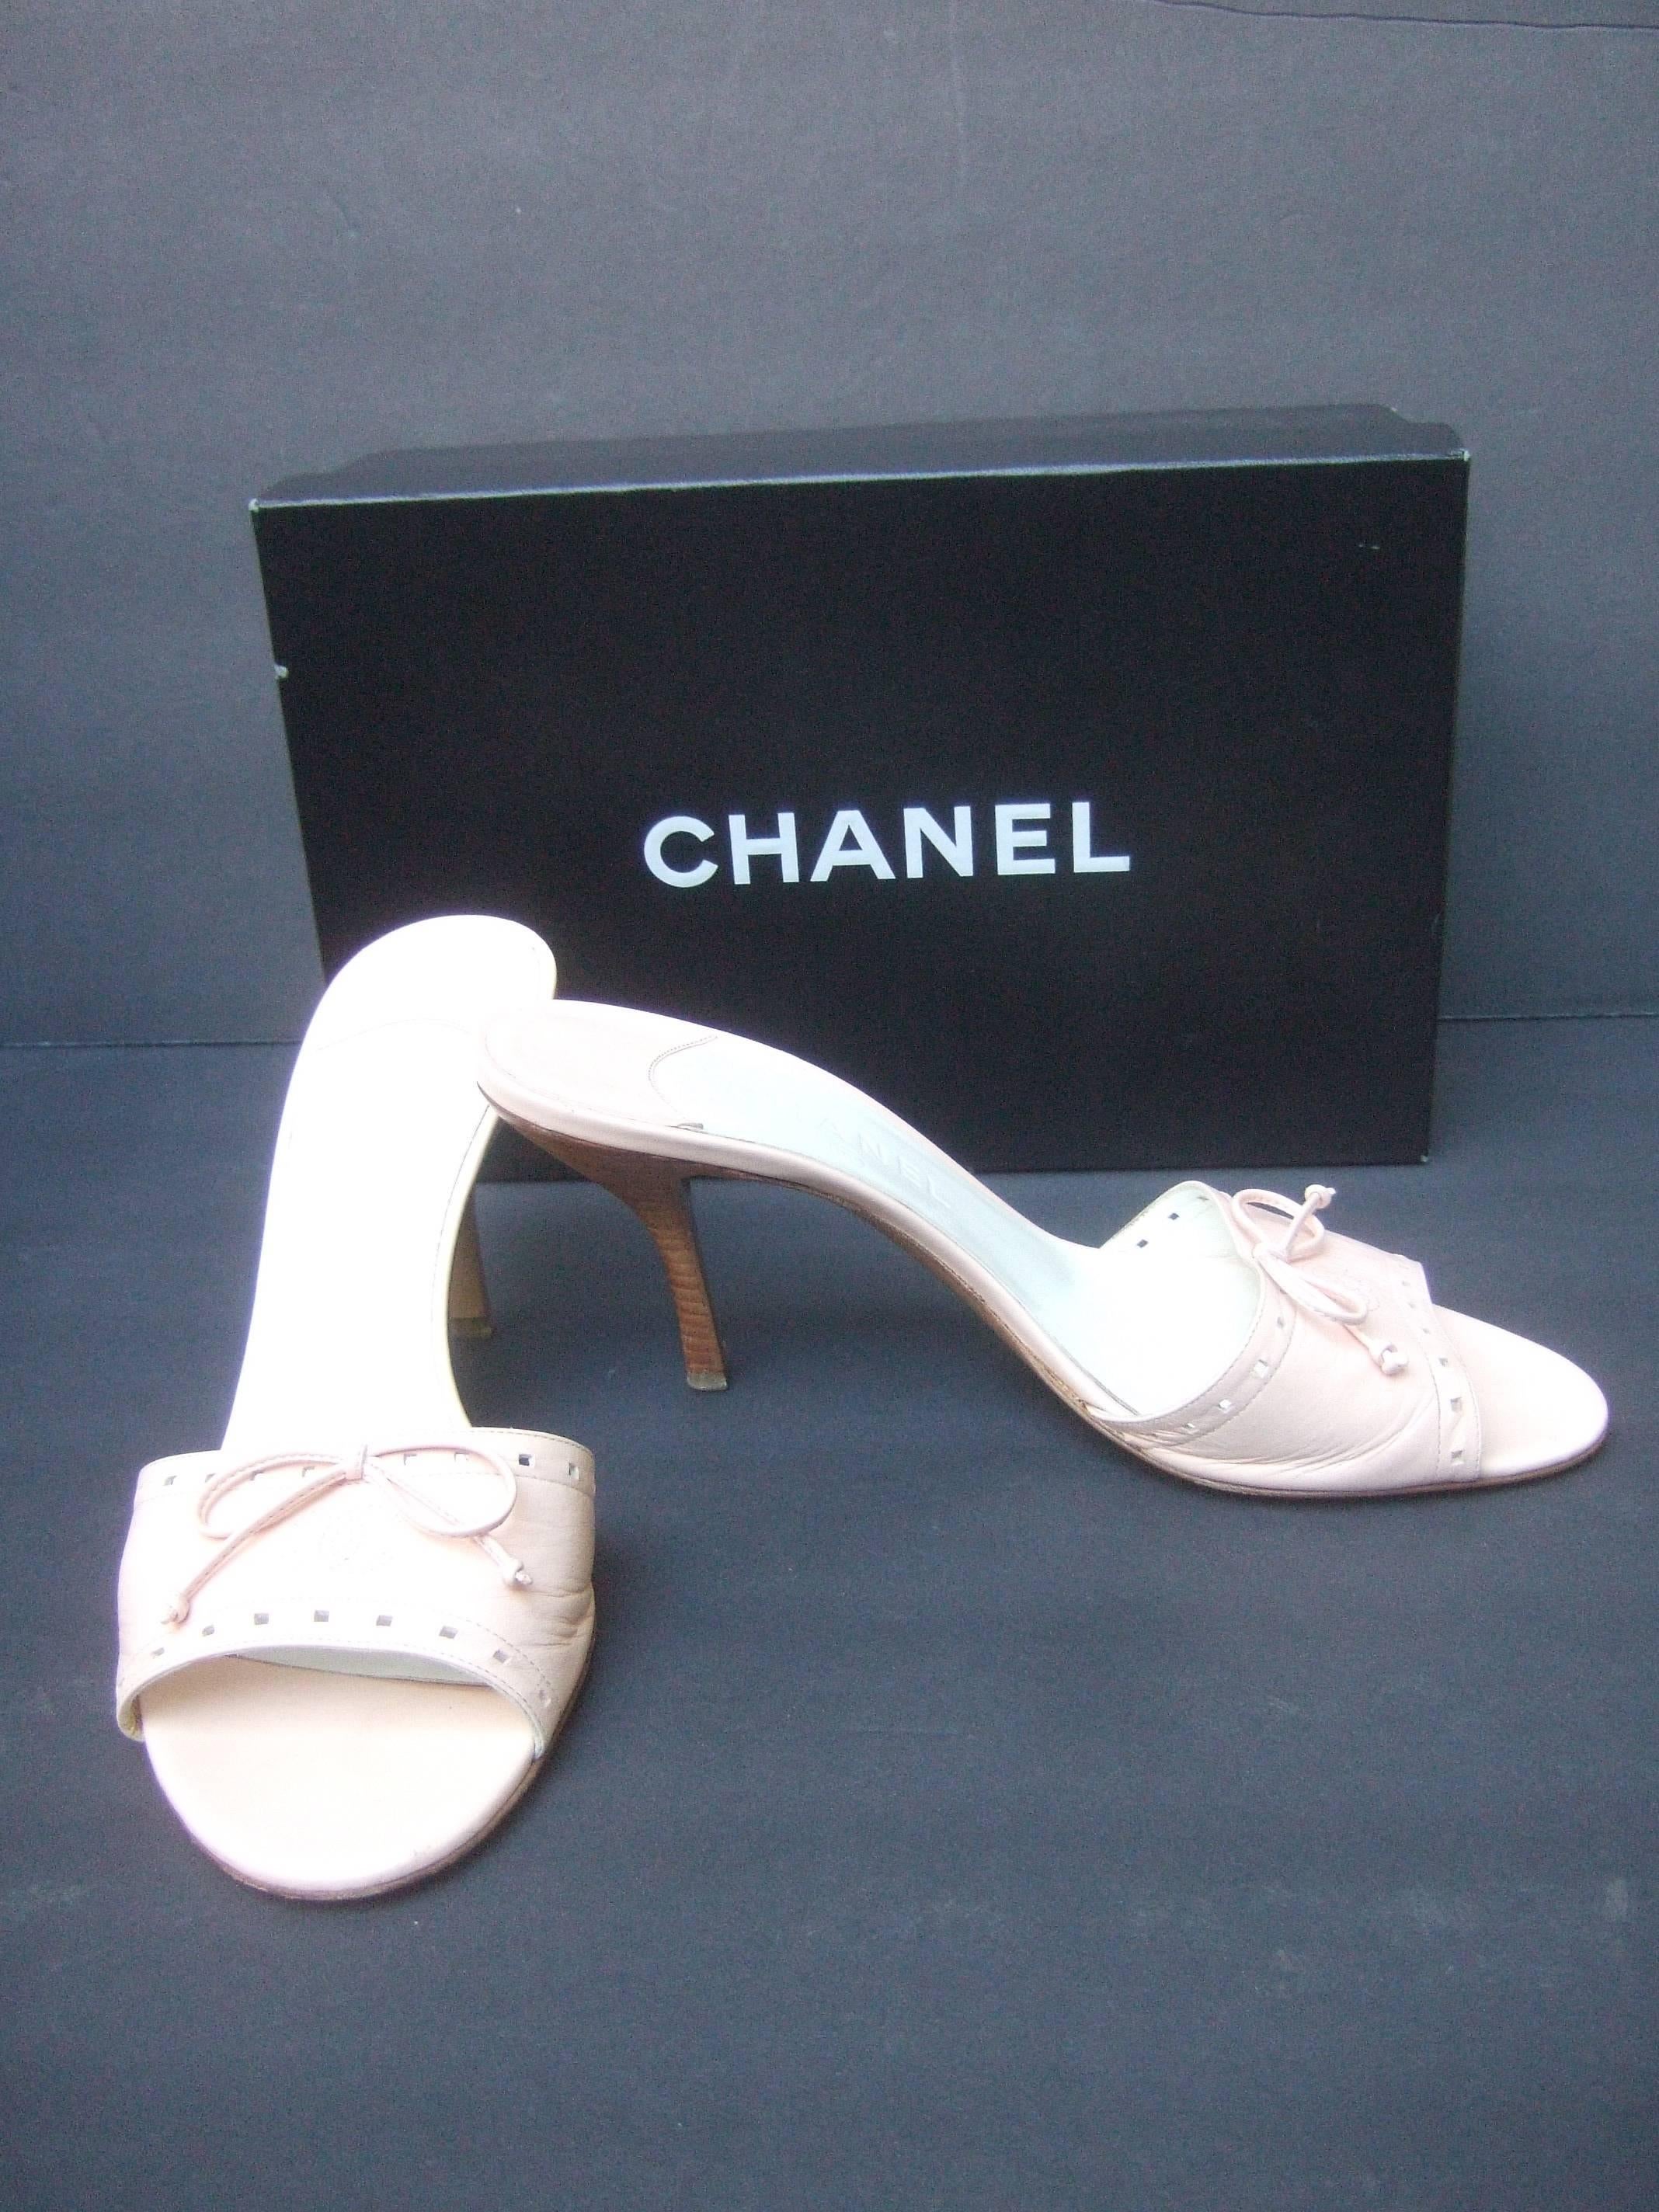 Chanel Classic Pale Pink Leather Mules in Box Size 40 2